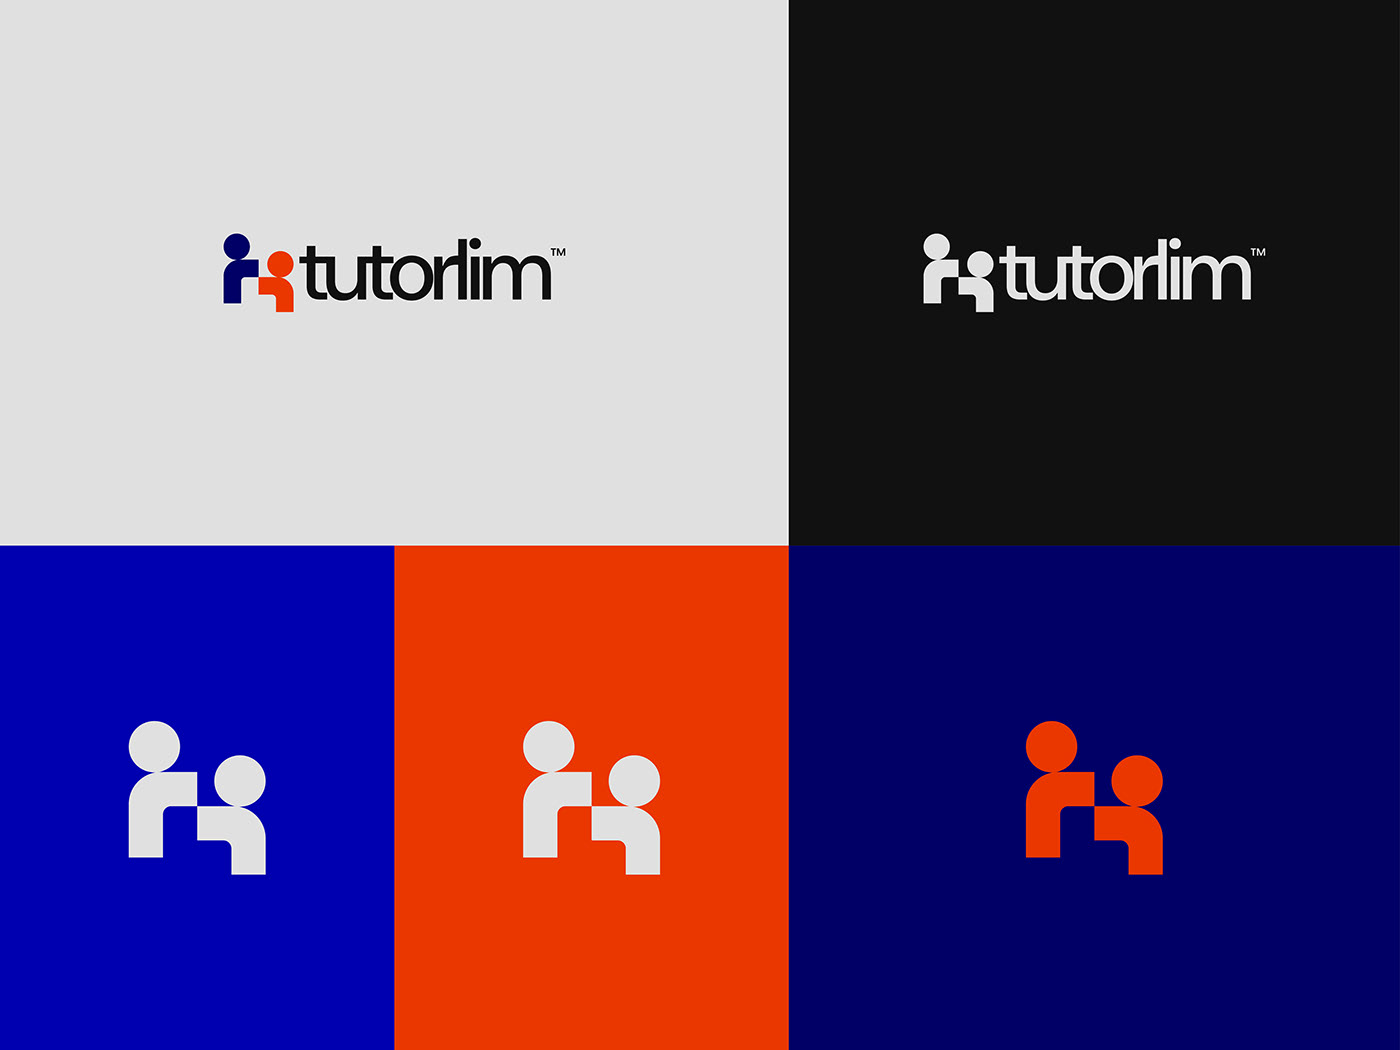 Full logo and icon of Tutorlim in different backgrounds.